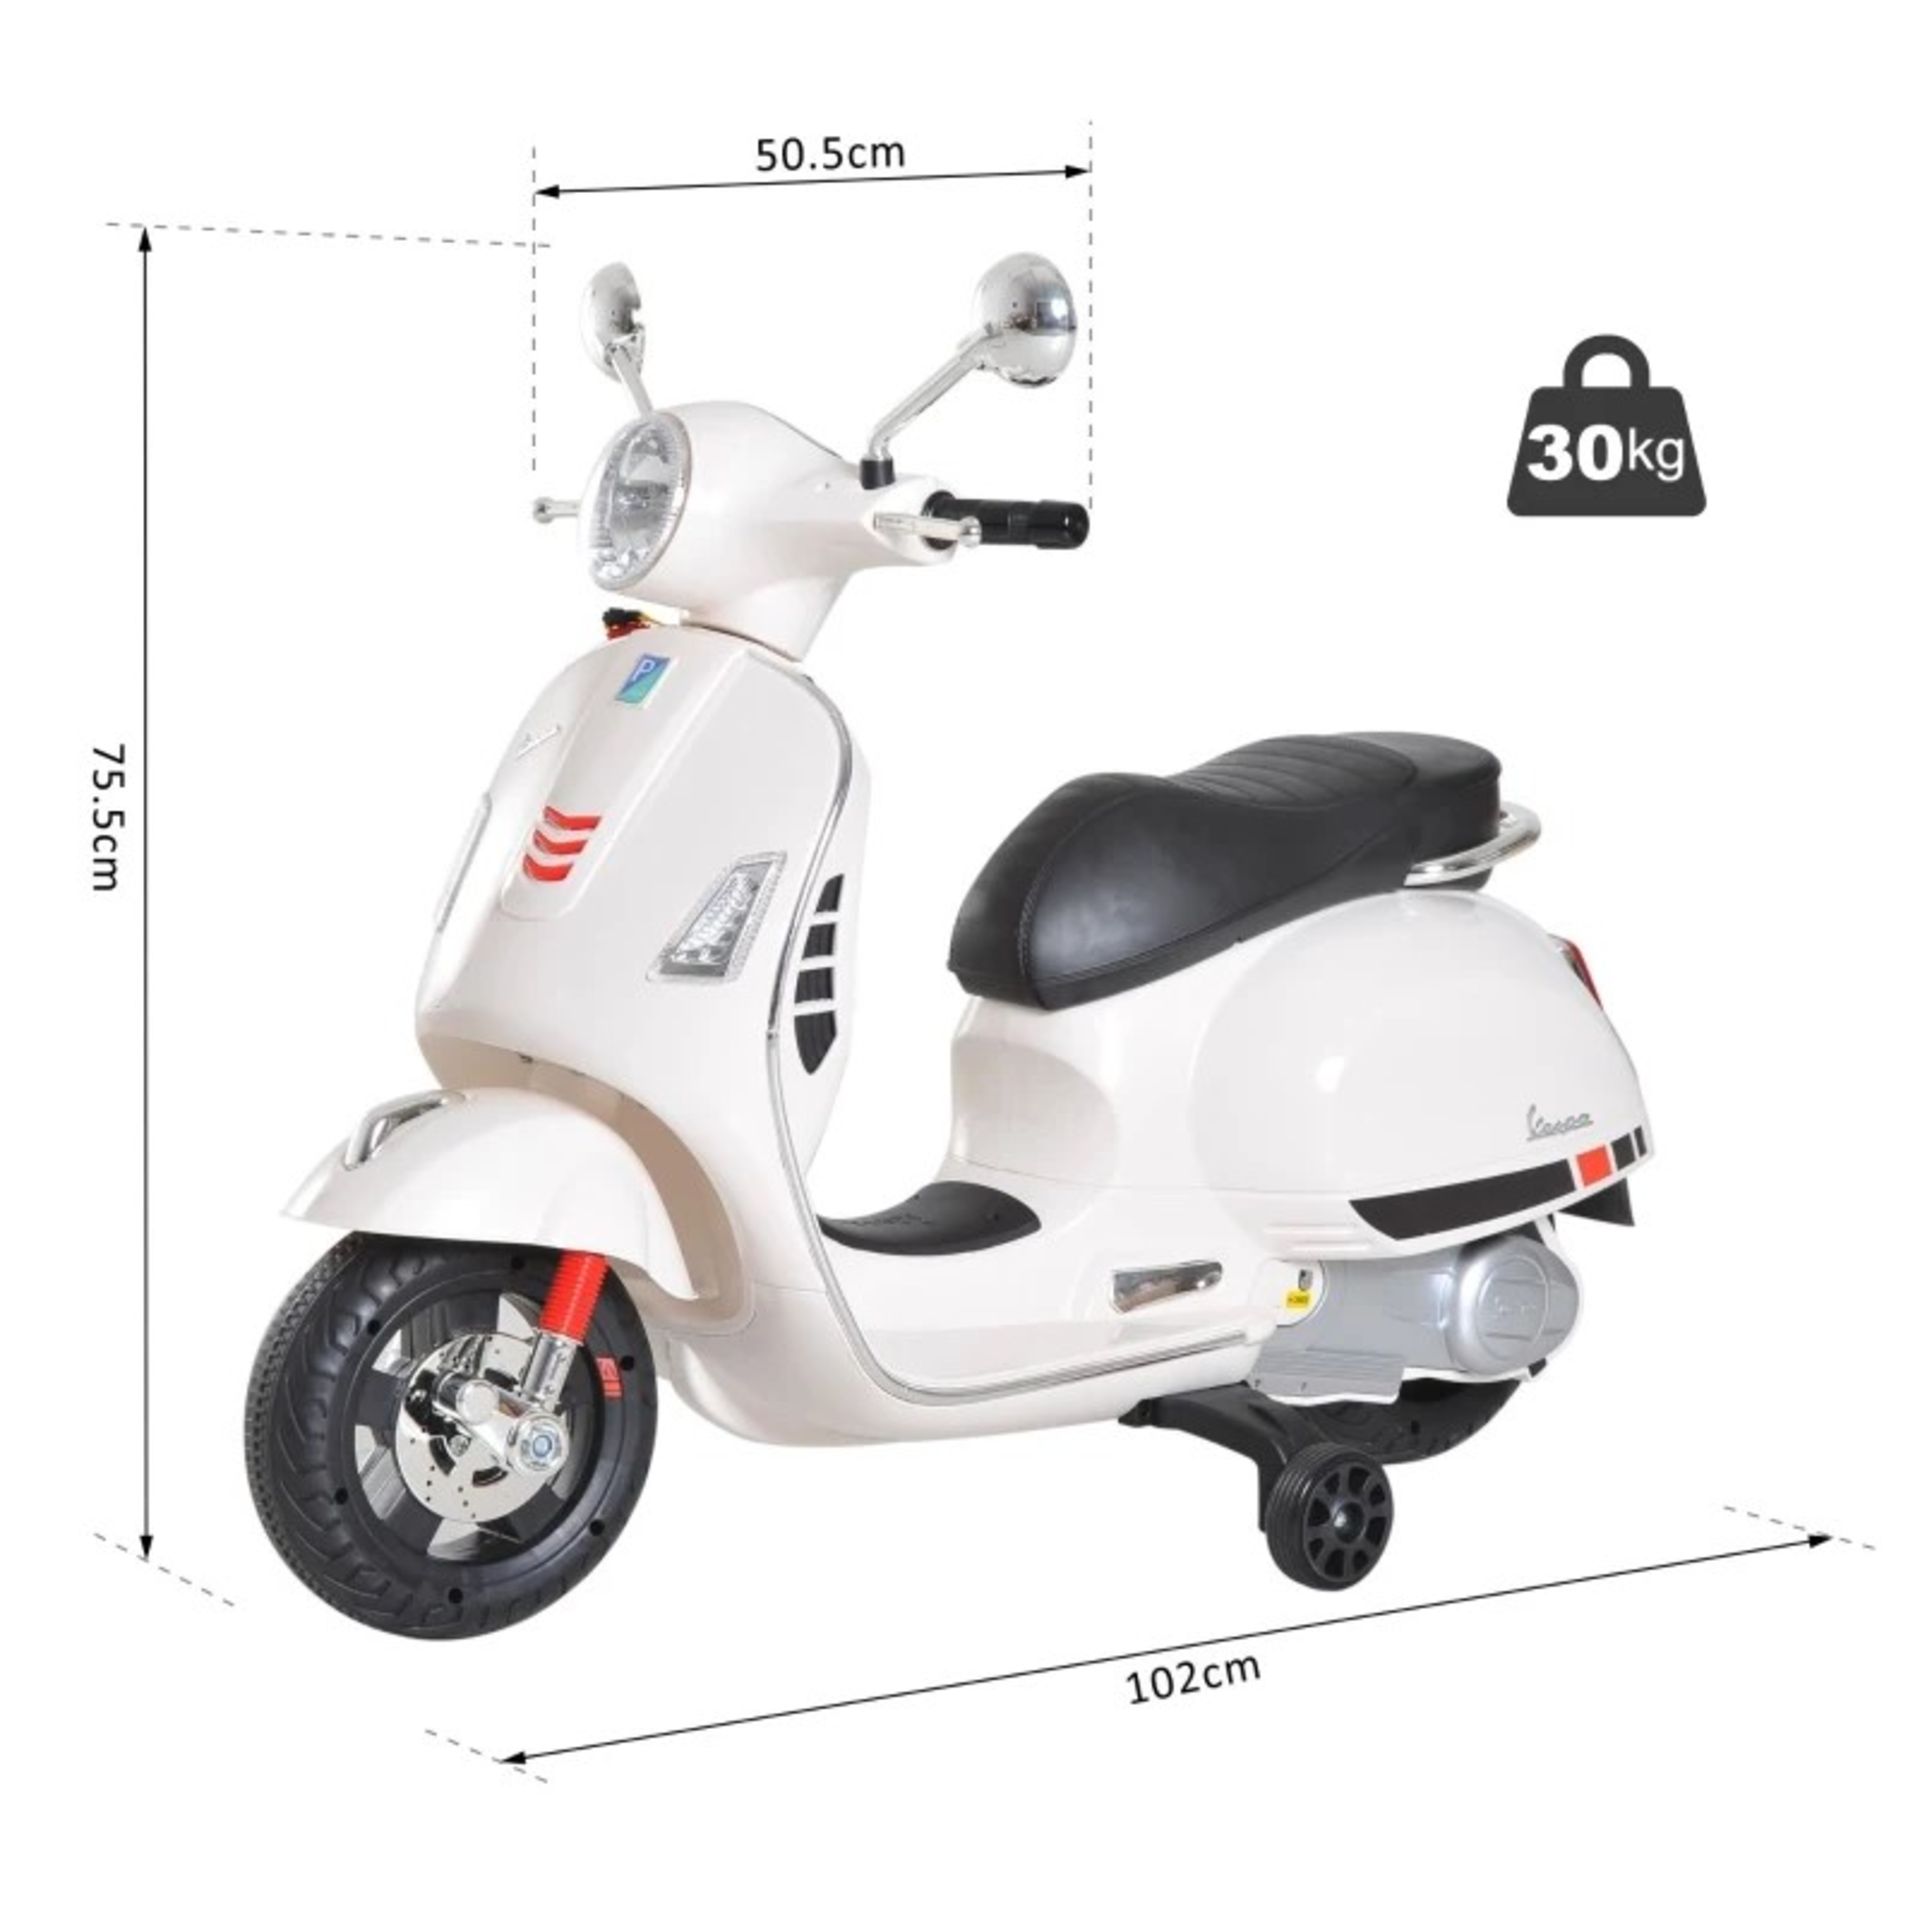 RRP £110.99 - Kids Ride On Vespa Motorcycle W/LED Lights - White - - Image 3 of 5